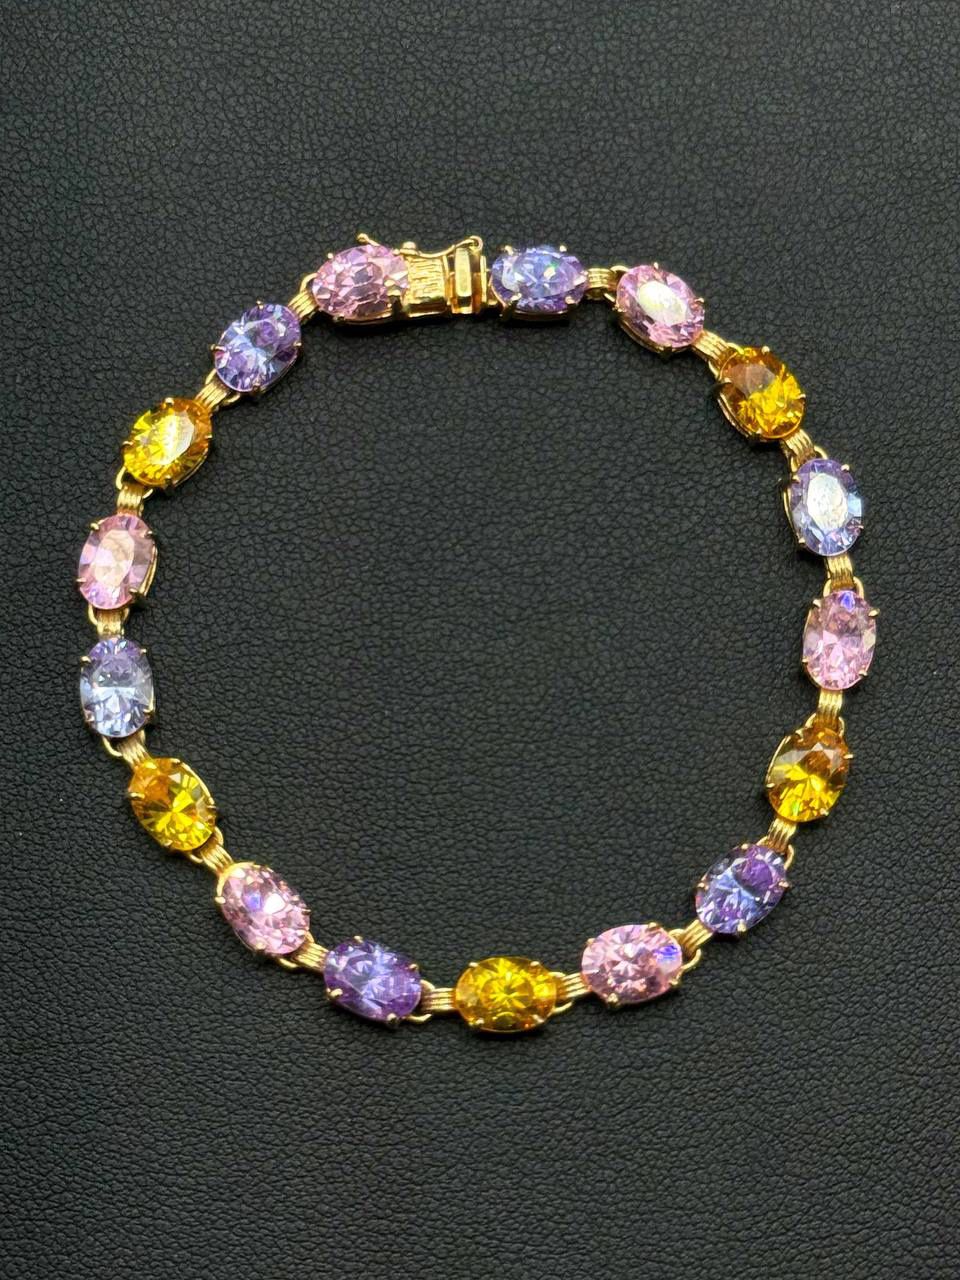 10k solid yellow gold multi color stone 7” lady’s bracelet